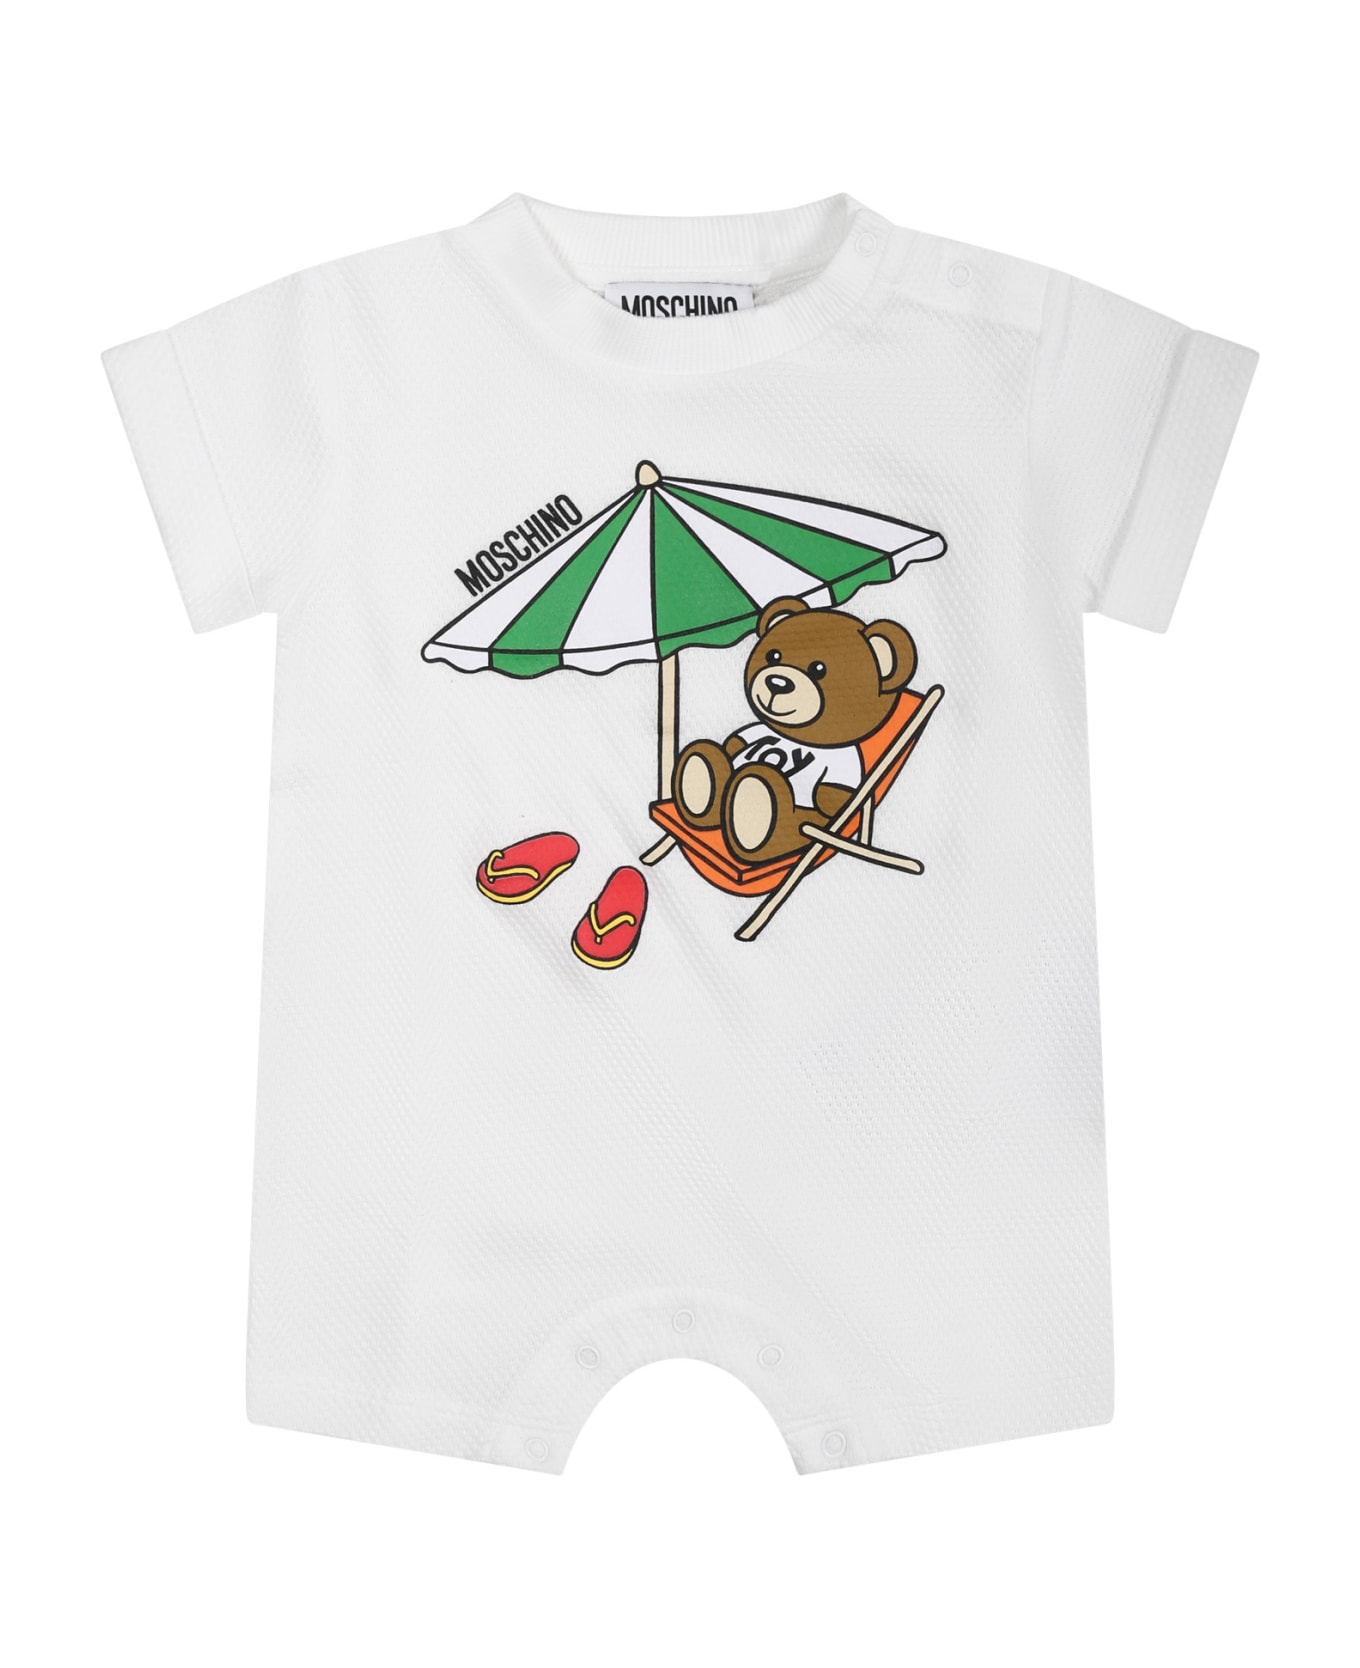 Moschino White Romper For Babies With Teddy Bear - White